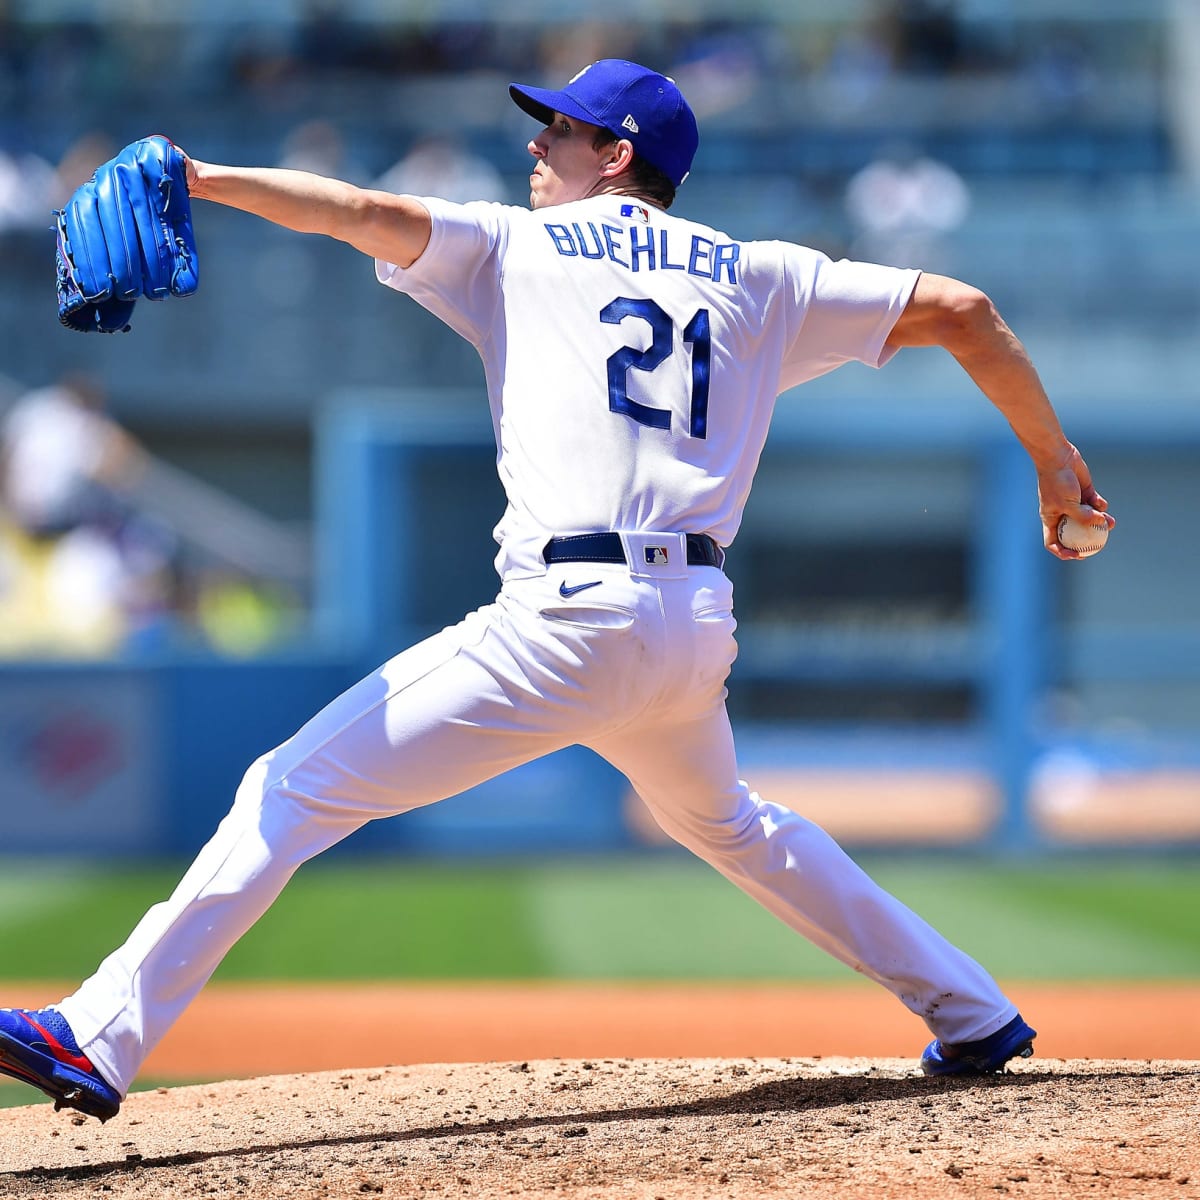 Dodgers News: Walker Buehler Intends To Channel Disappointment